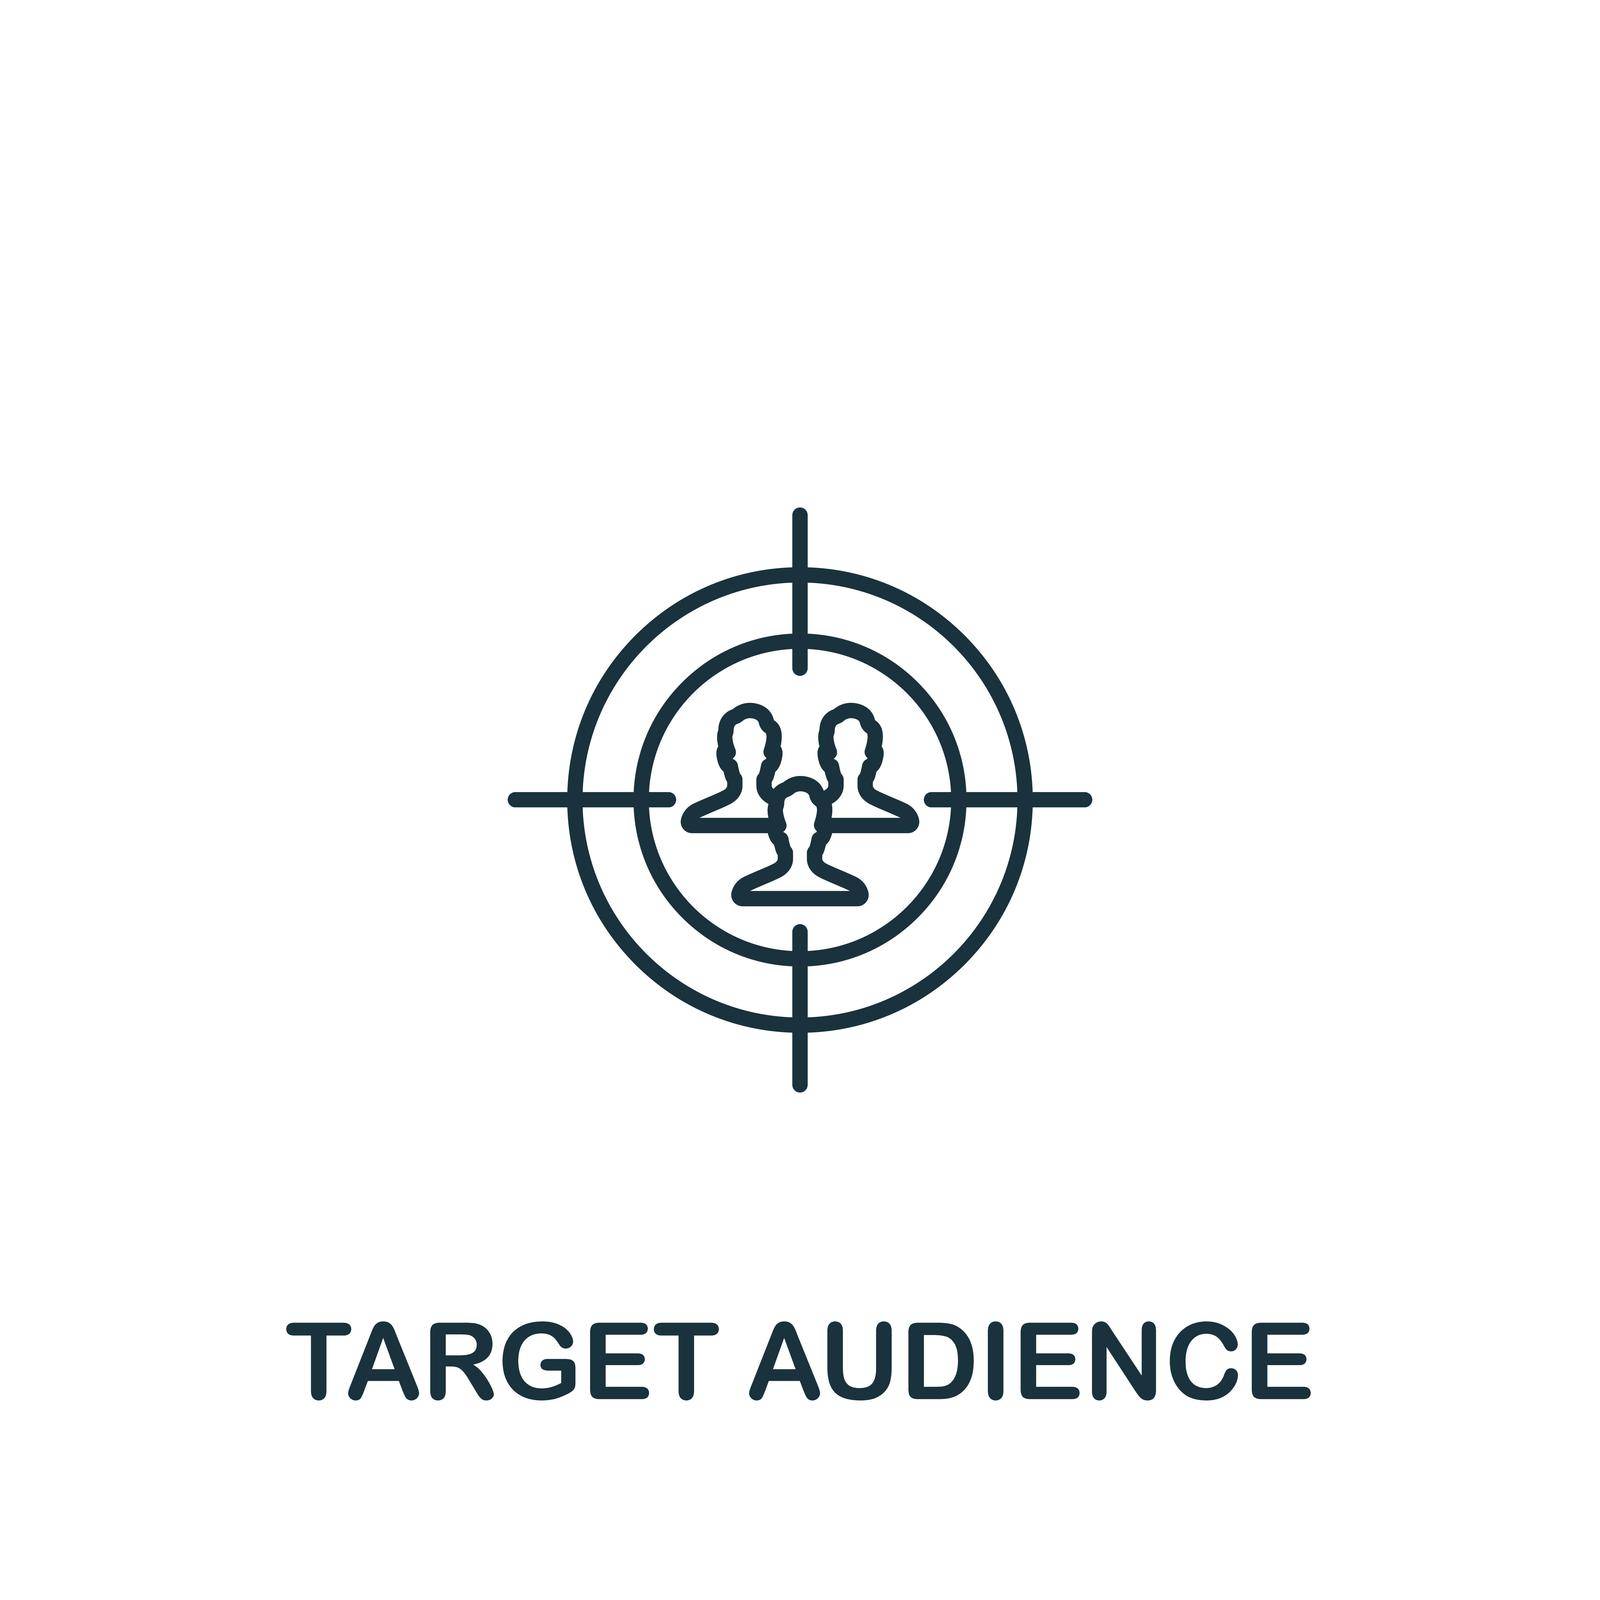 Target Audience icon. Simple line element community symbol for templates, web design and infographics.